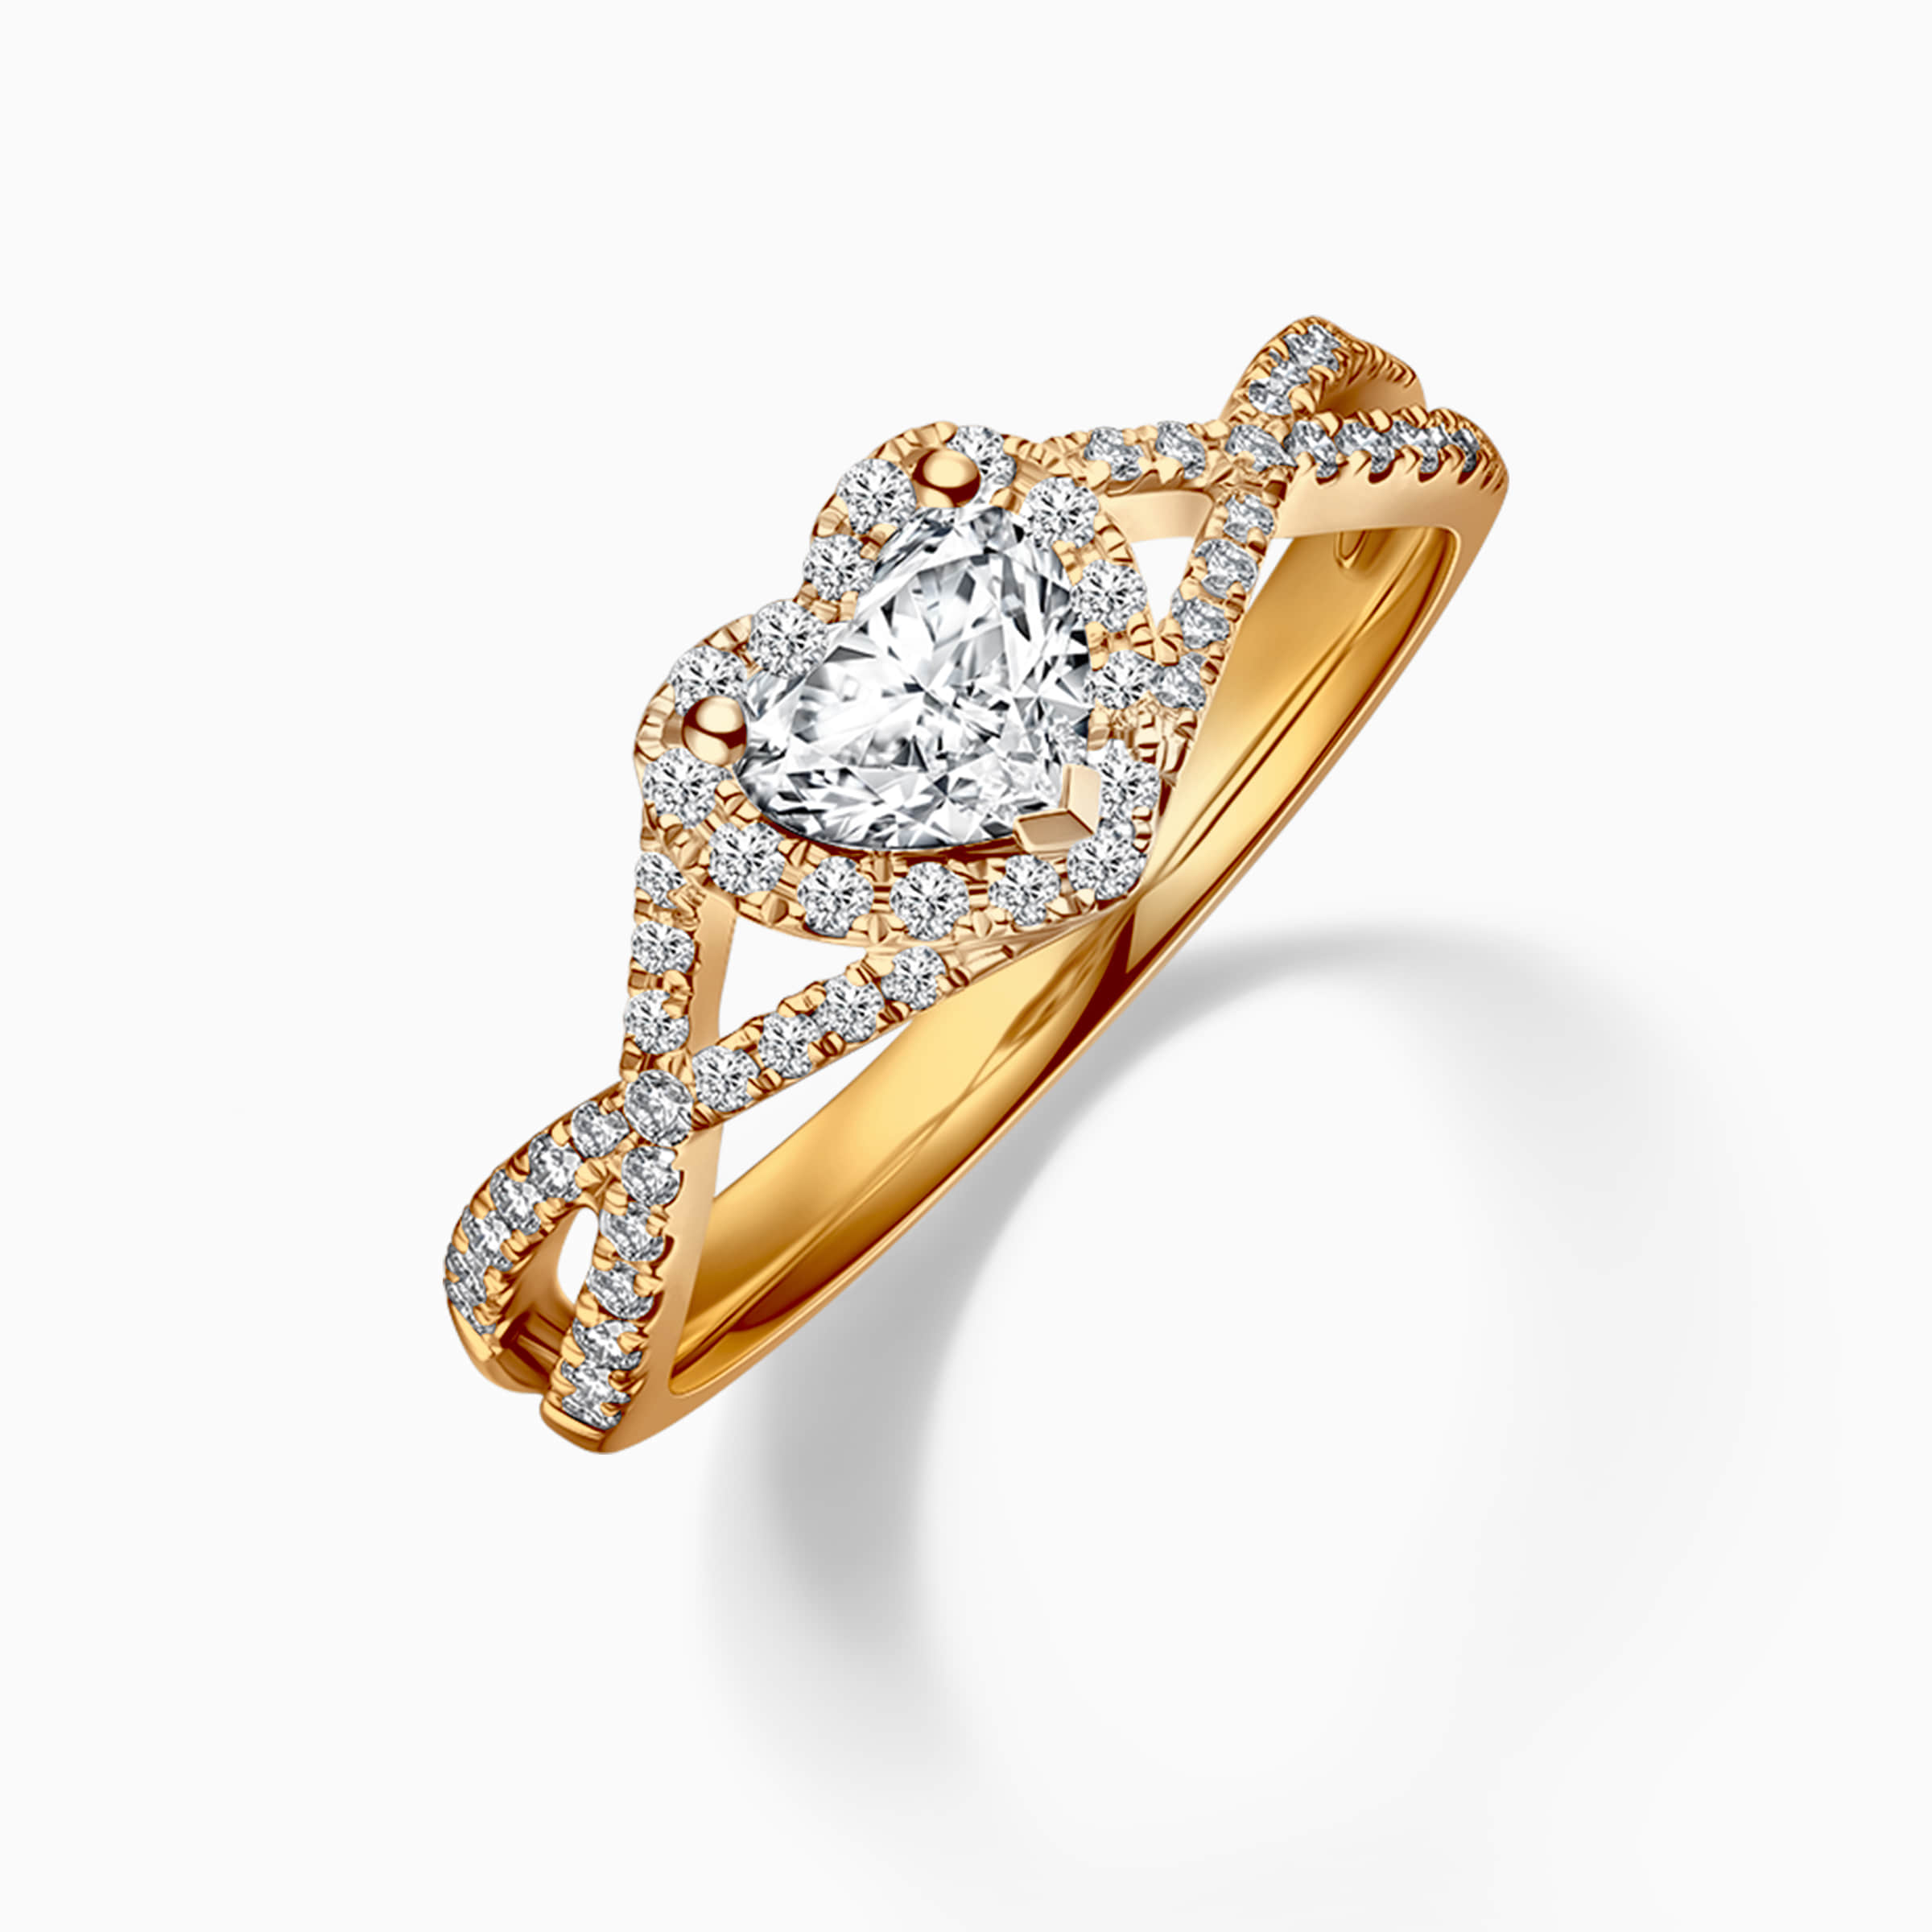 Darry Ring halo heart promise ring in yellow gold